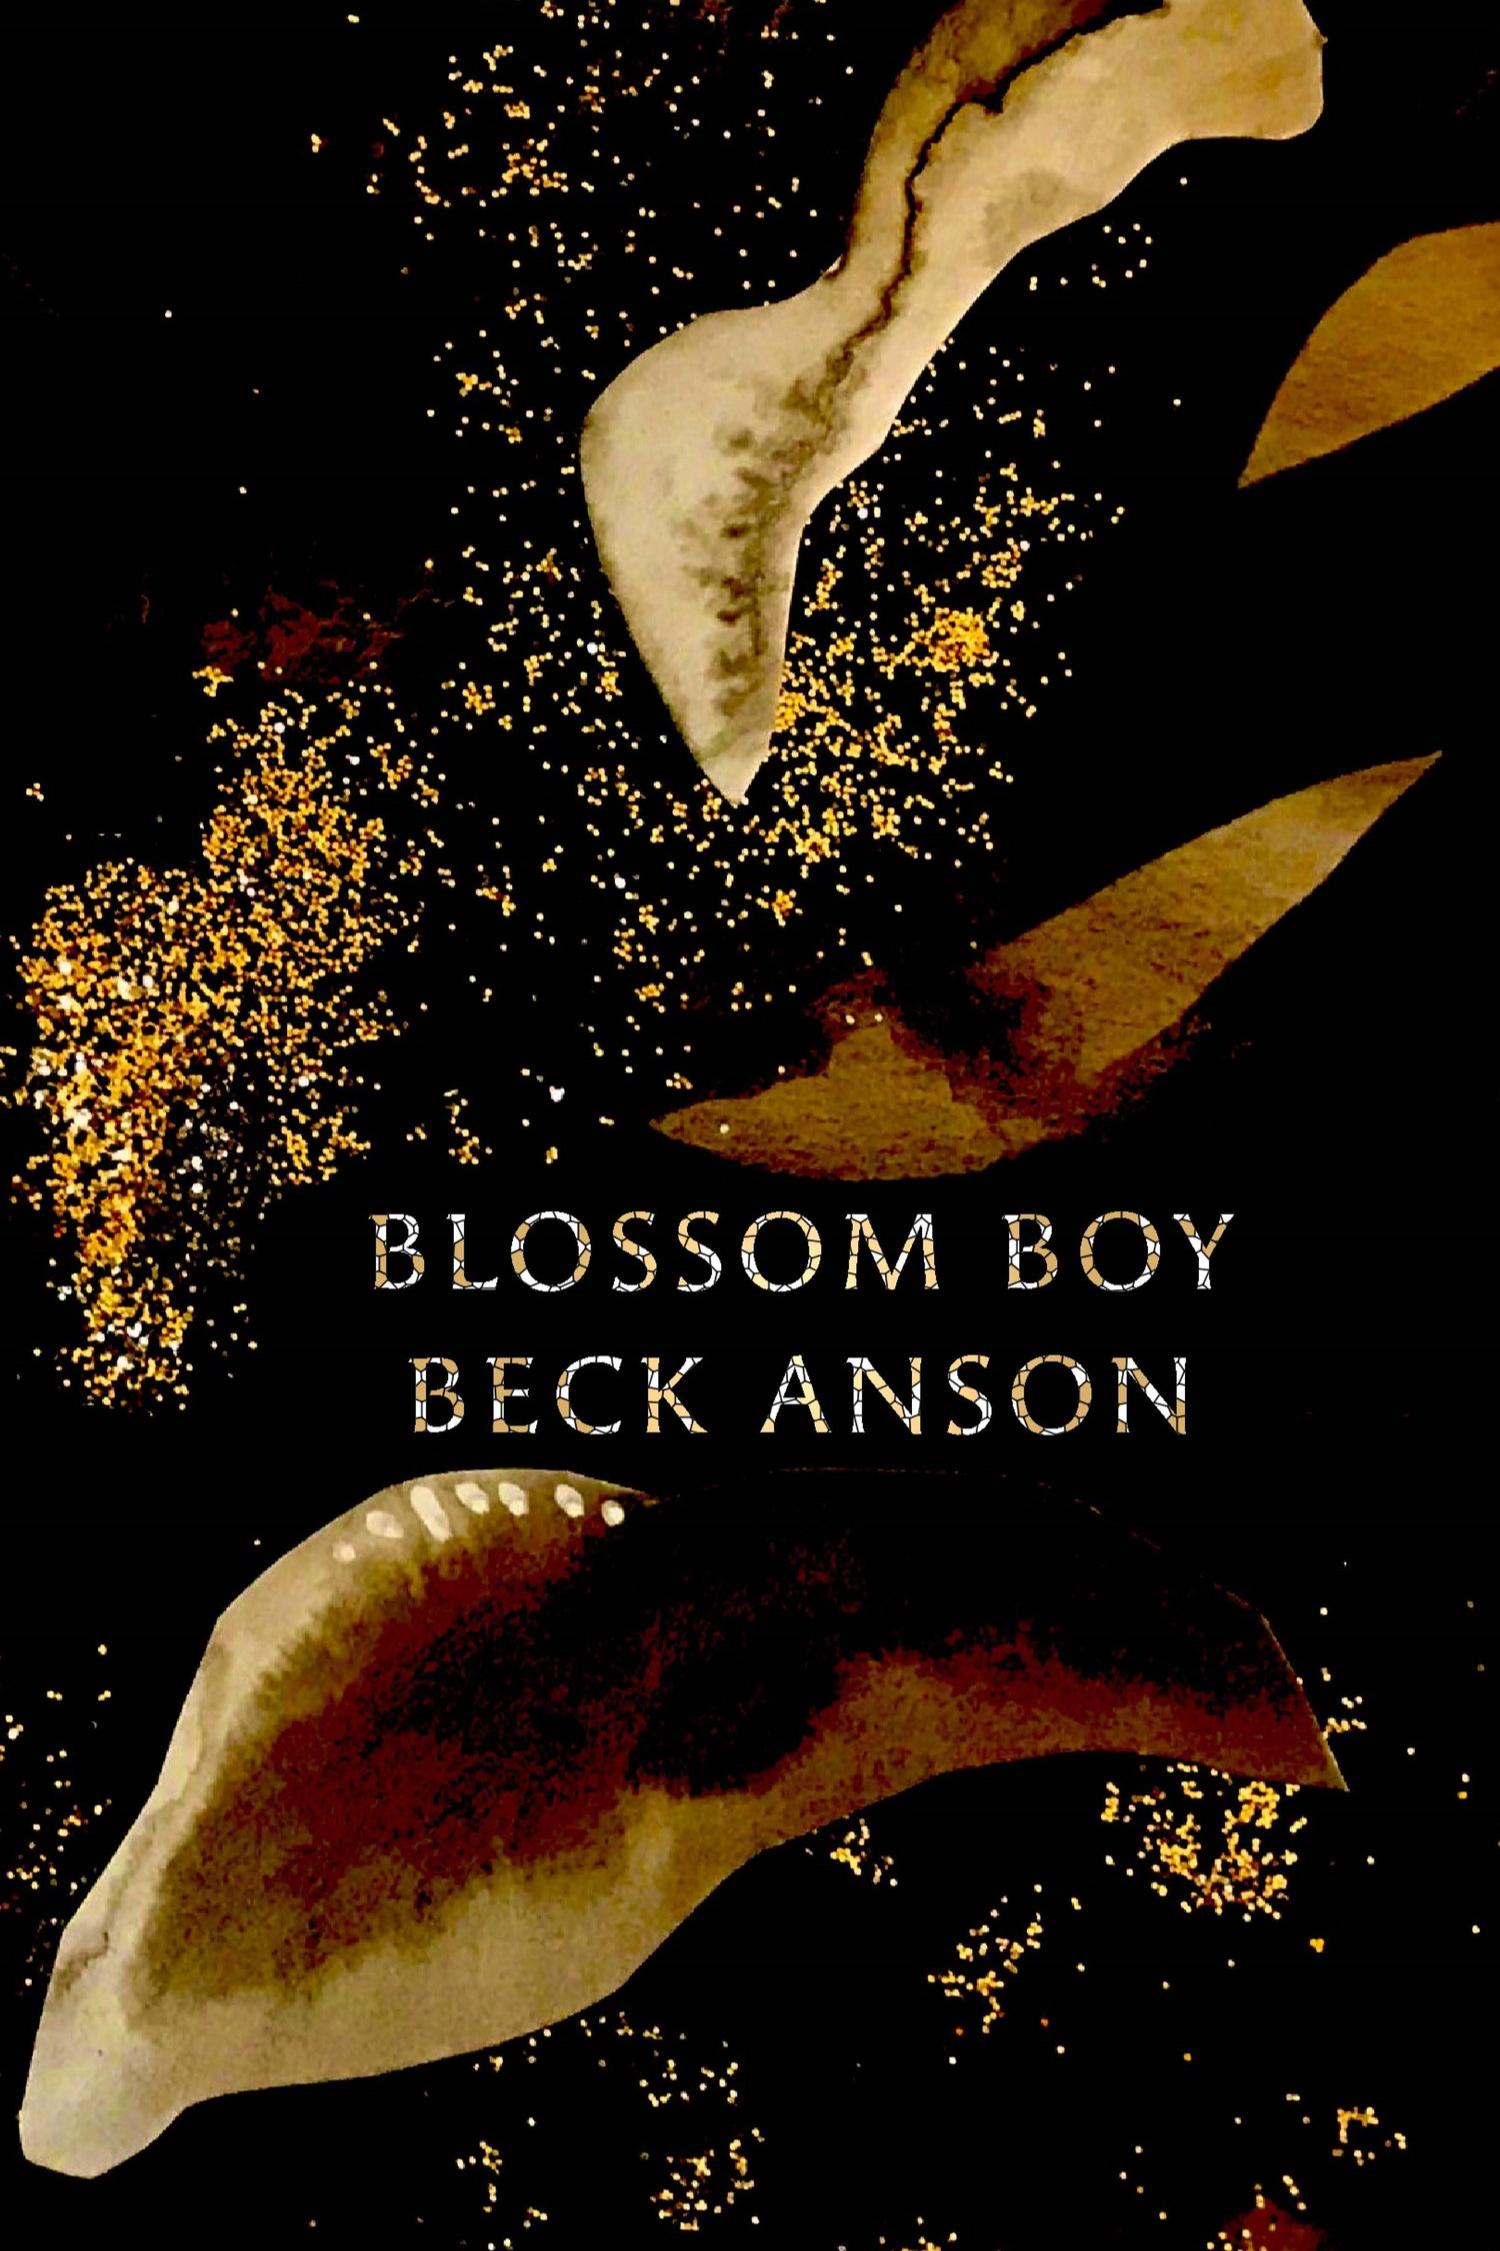 Book cover of Blossom Boy by Beck Anson